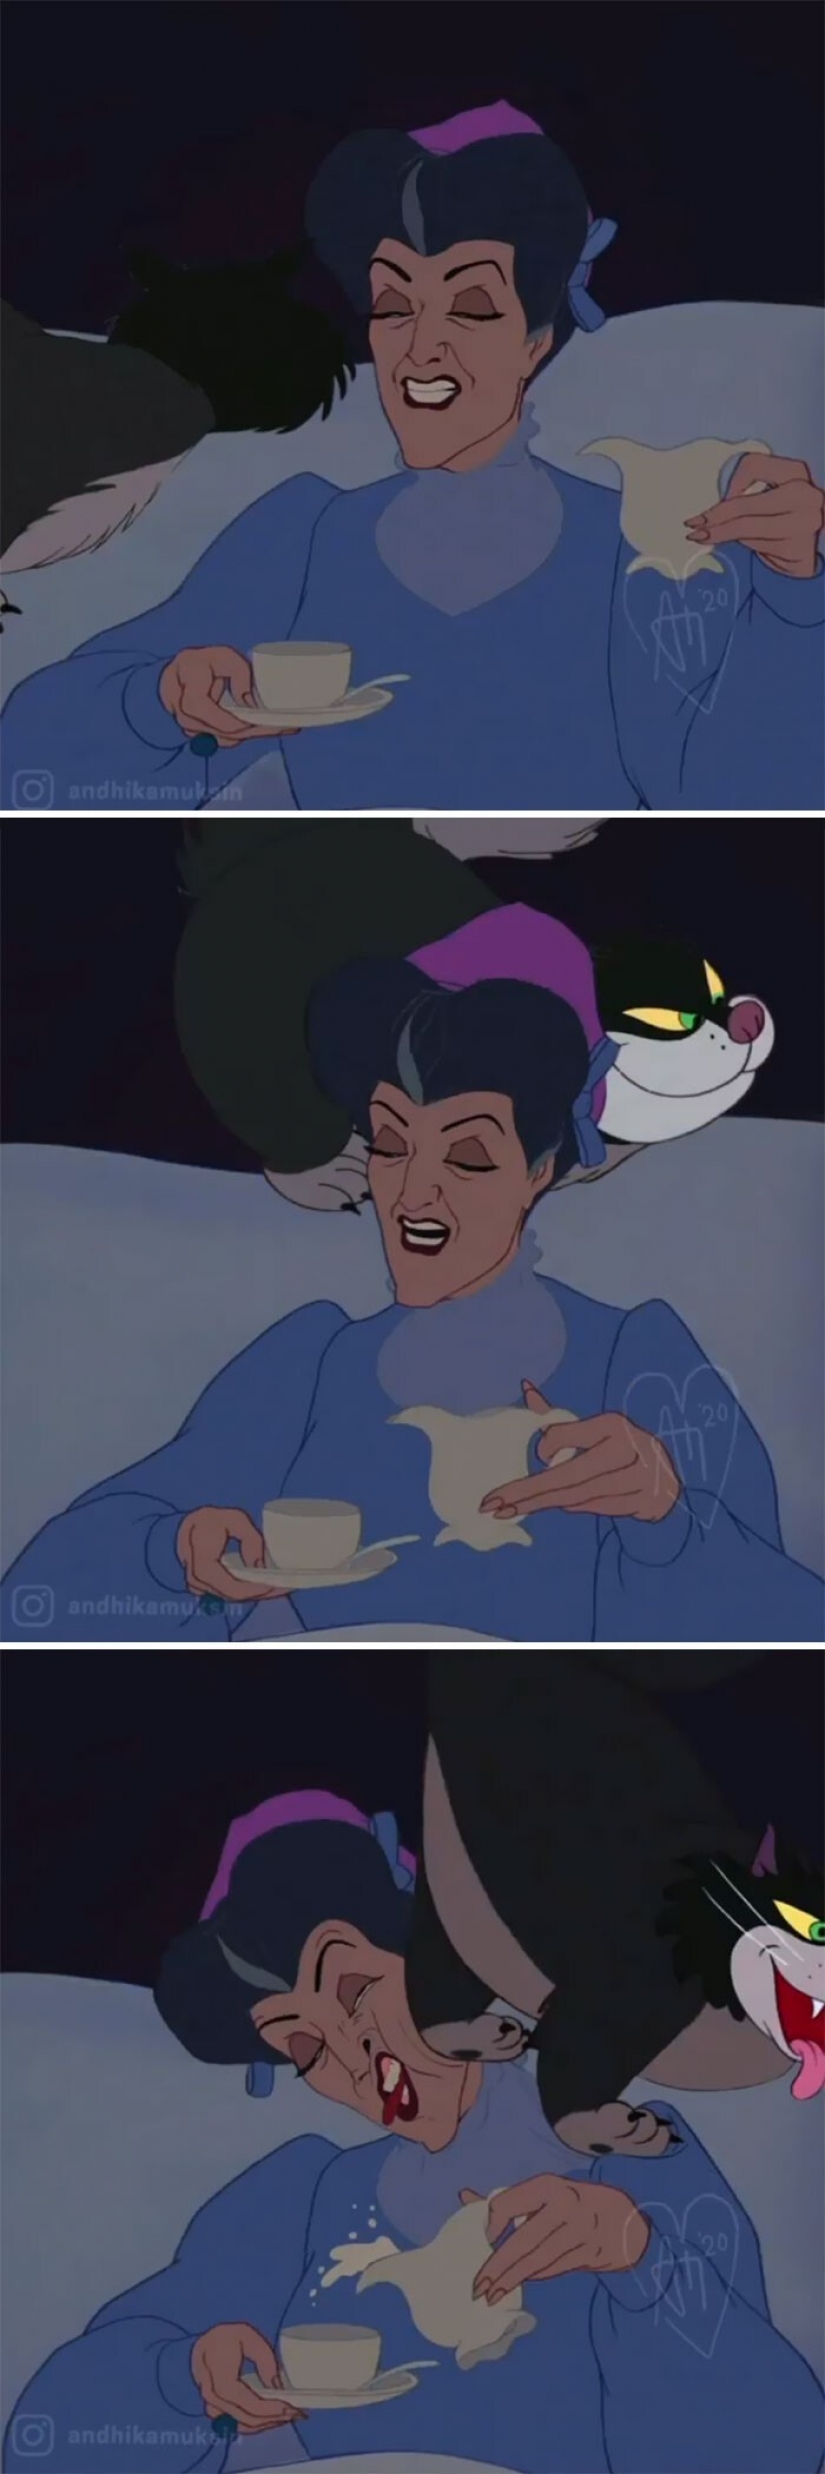 What would the Disney characters be like in the reality of 2020